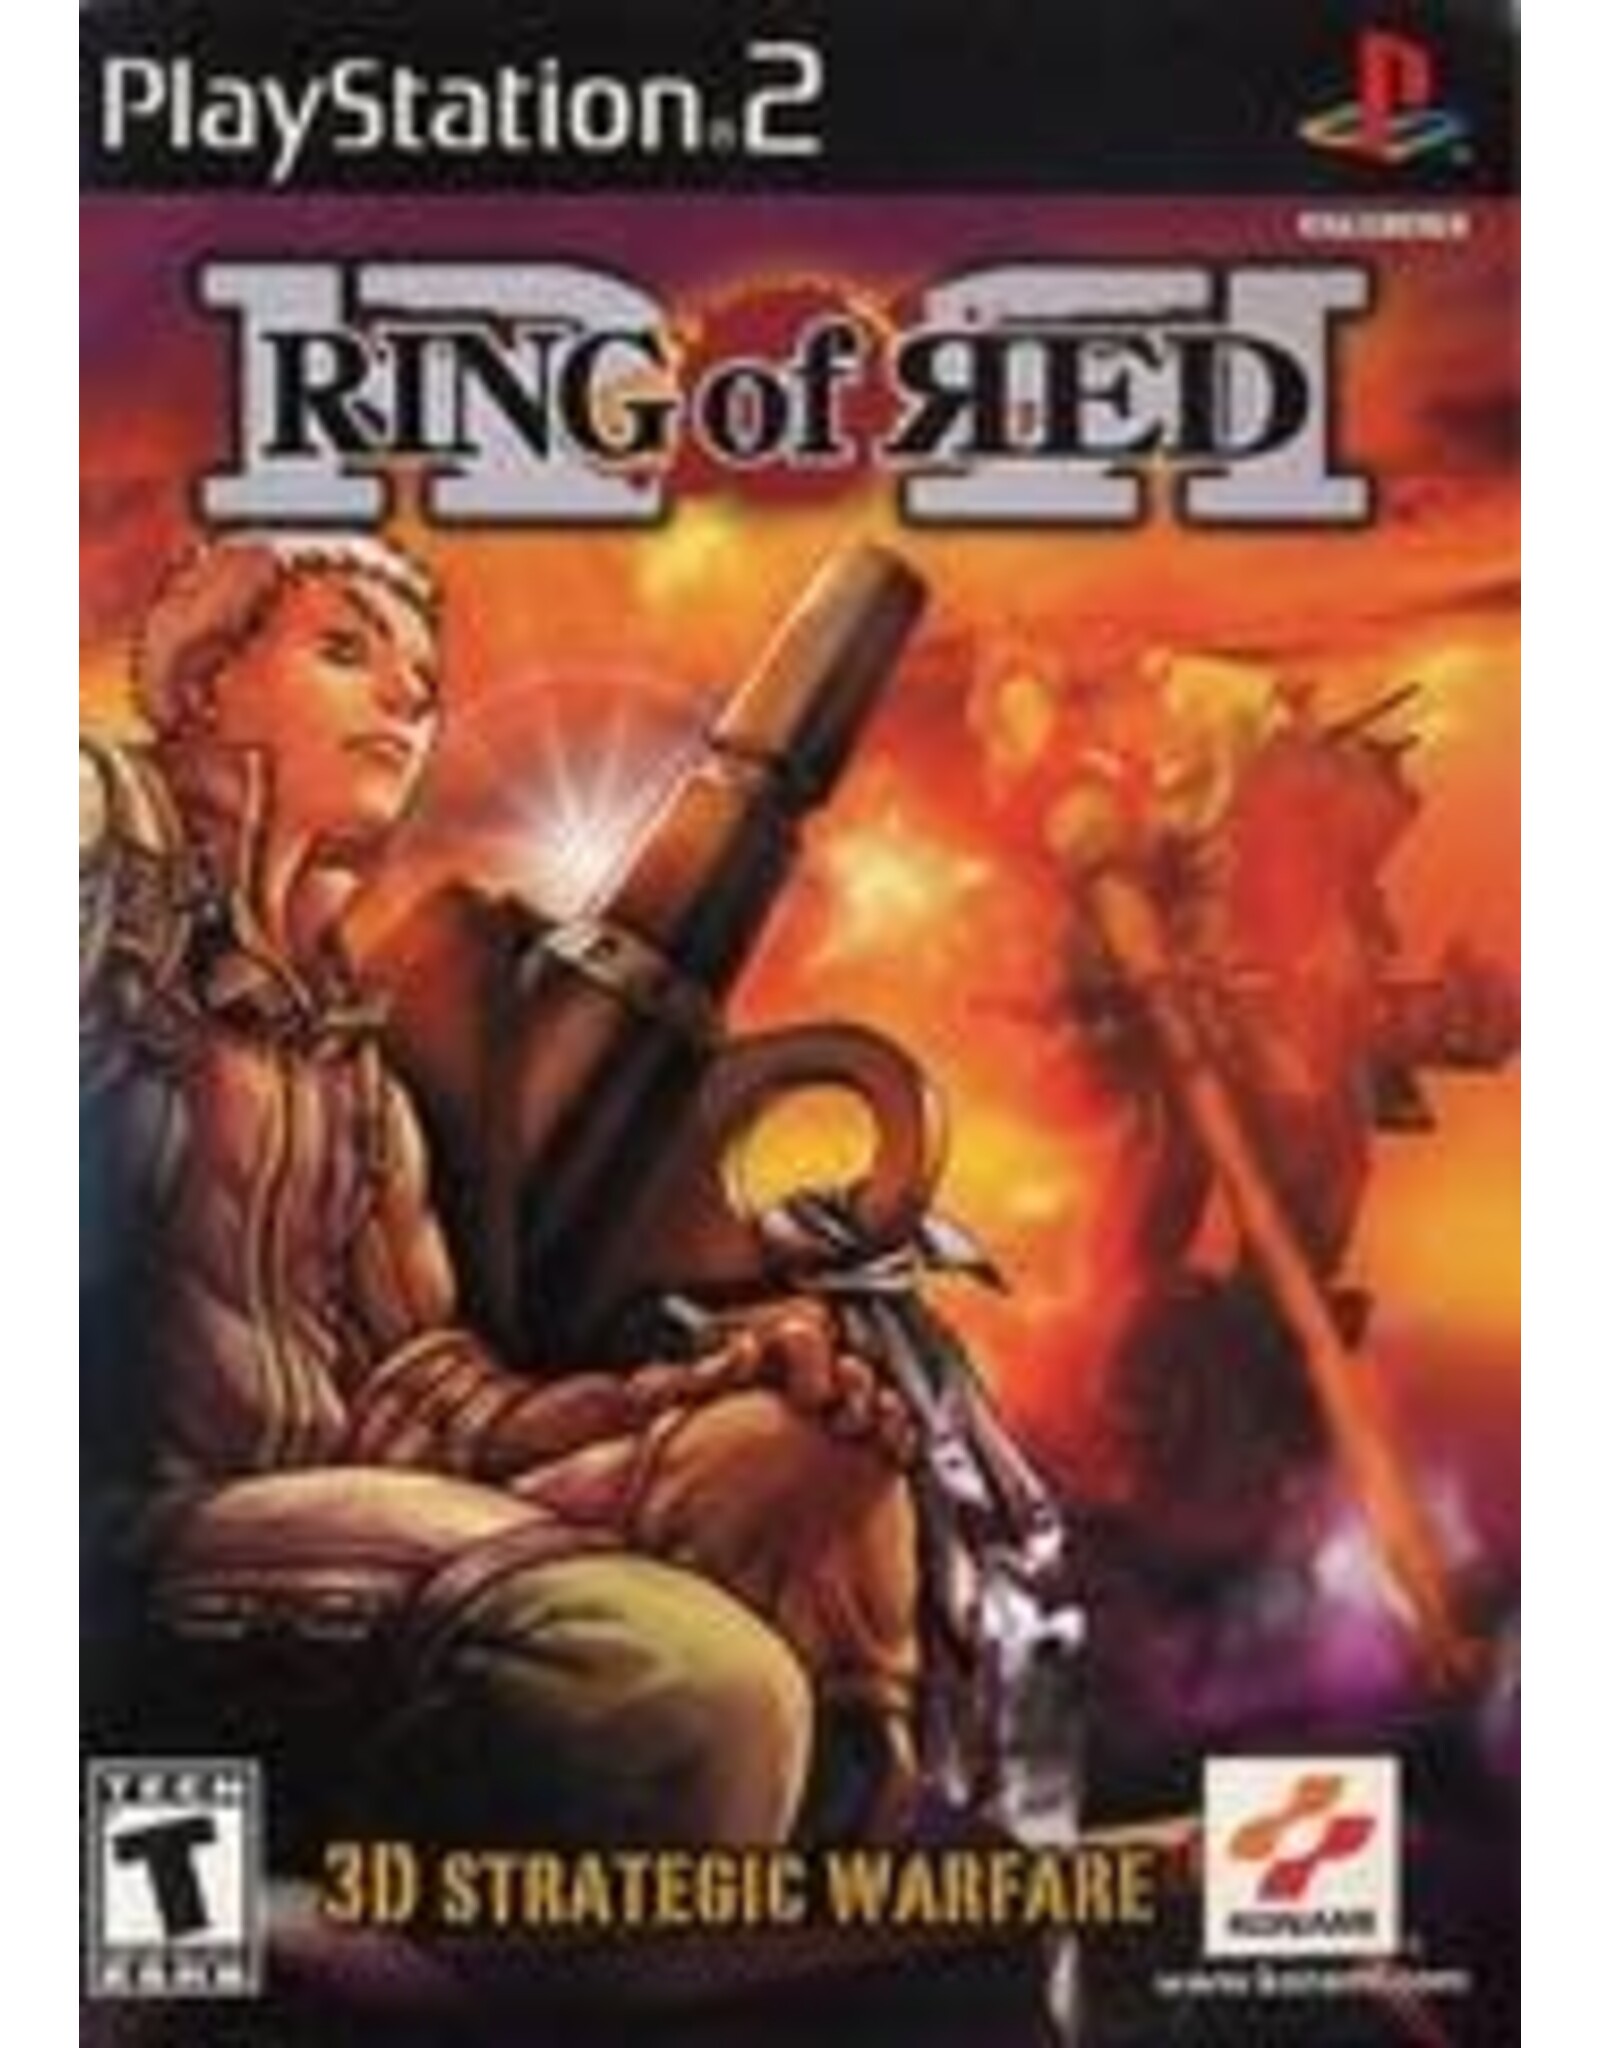 Playstation 2 Ring of Red (Disc Only)